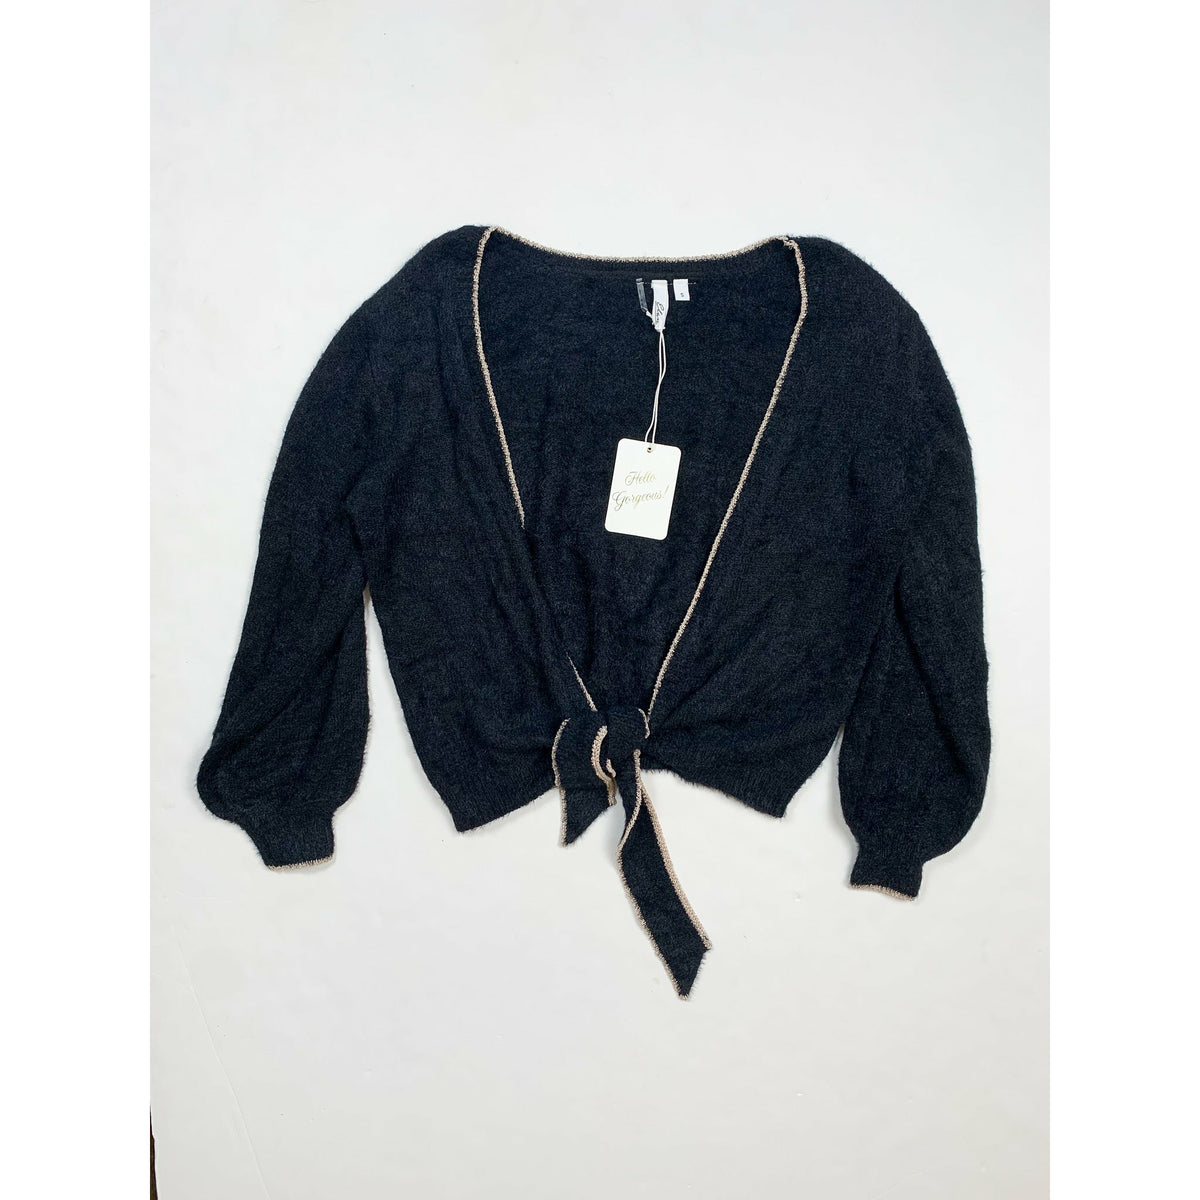 Elan - Black Tie Back Sweater with Gold Detailing - NEW WITH TAGS